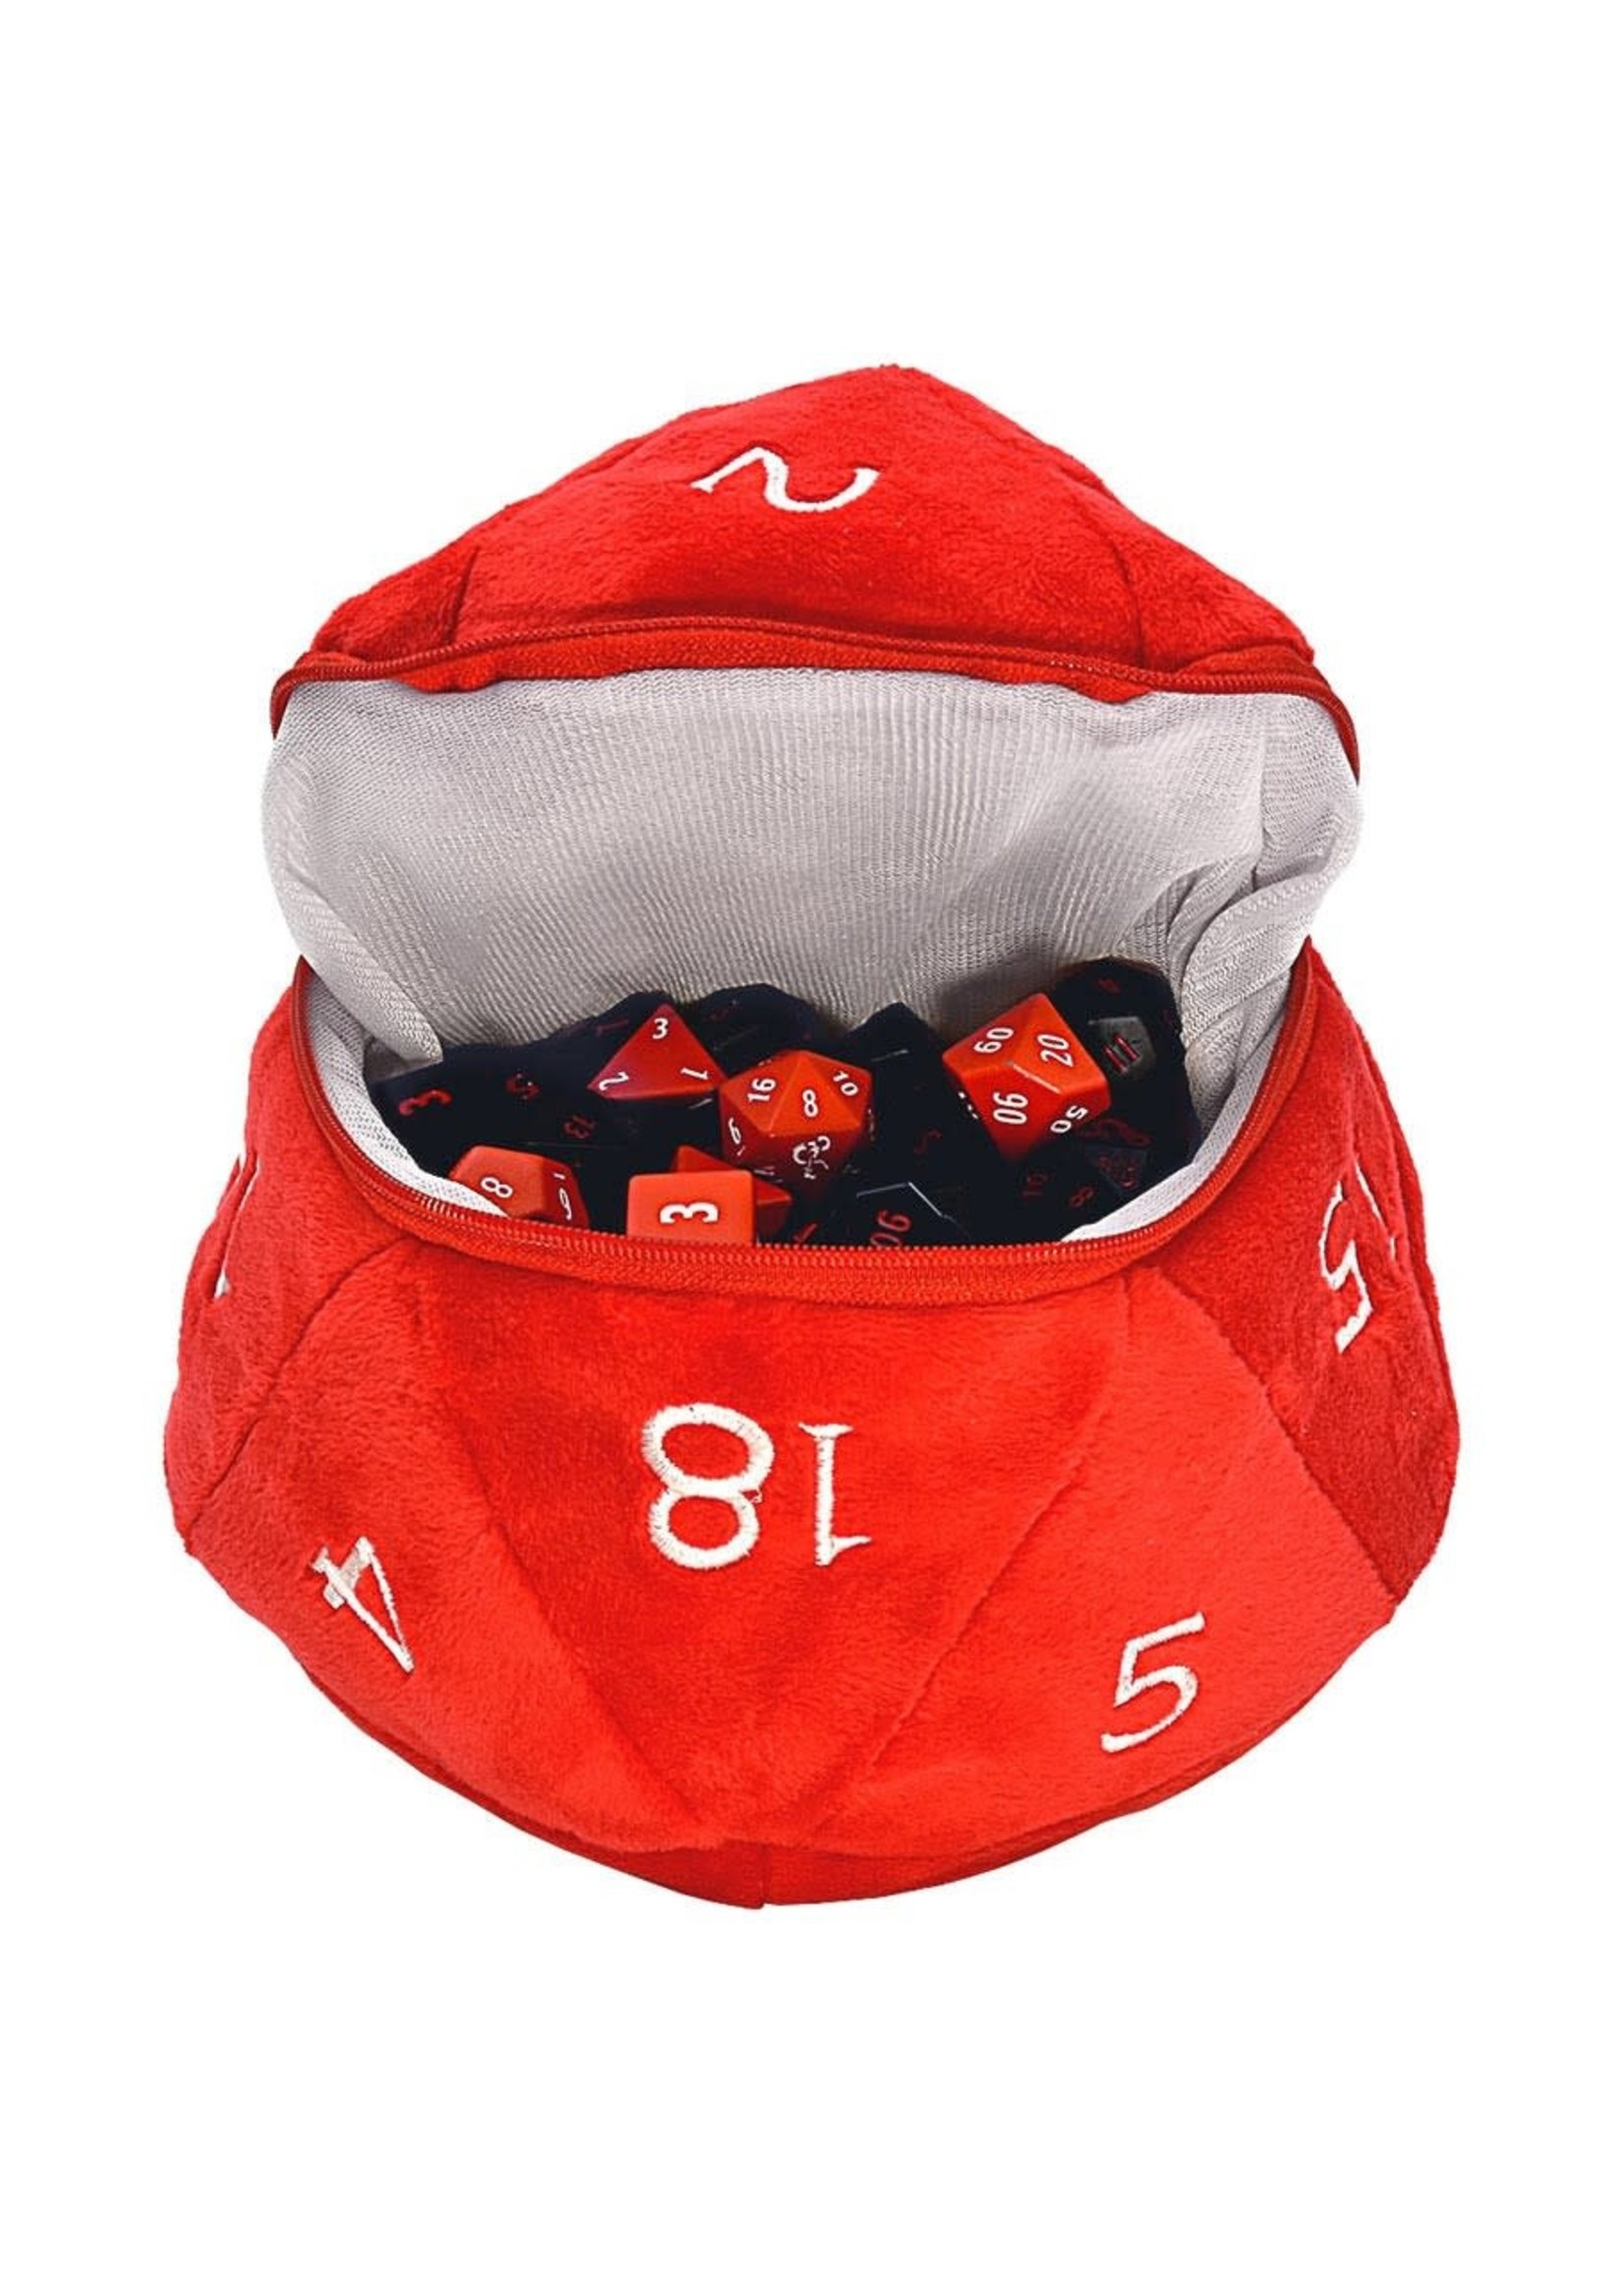 Ultra Pro Dice Bag: d20 Plush: D&D: Red with White